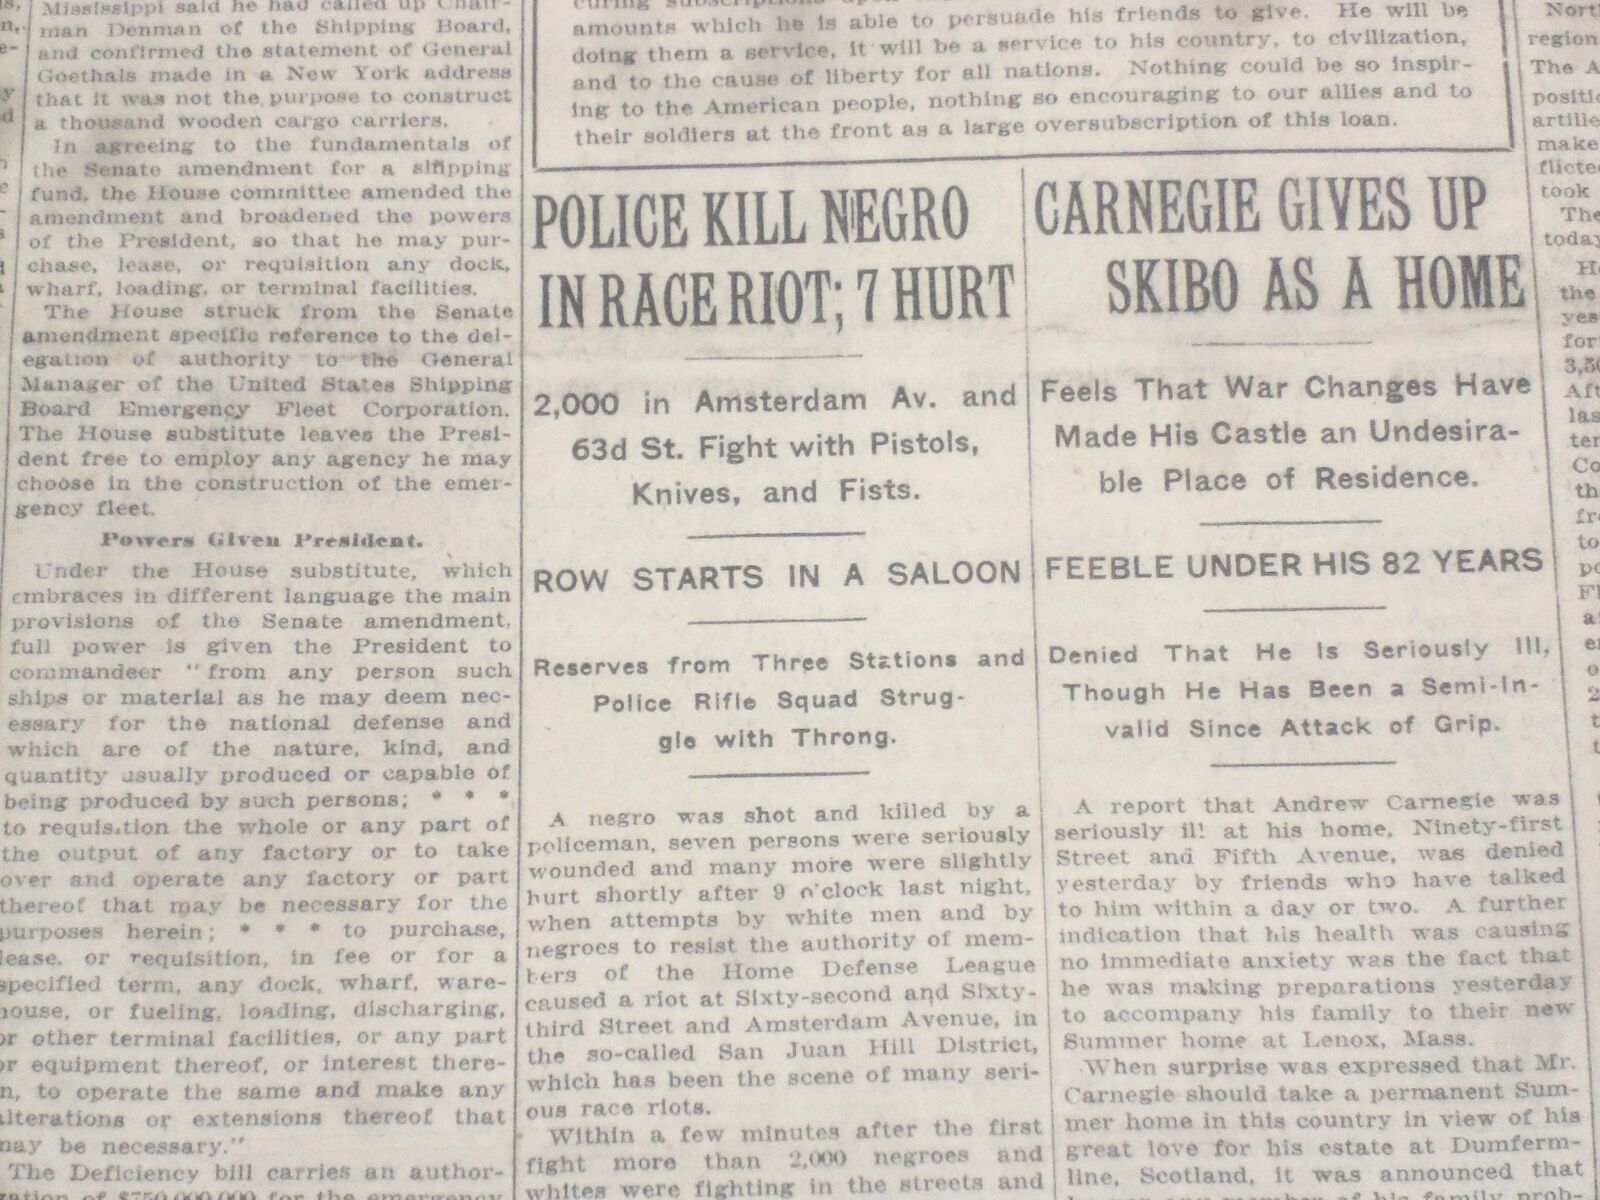 1917 MAY 27 NEW YORK TIMES - POLICE KILL NEGRO IN RACE RIOT - NT 9146